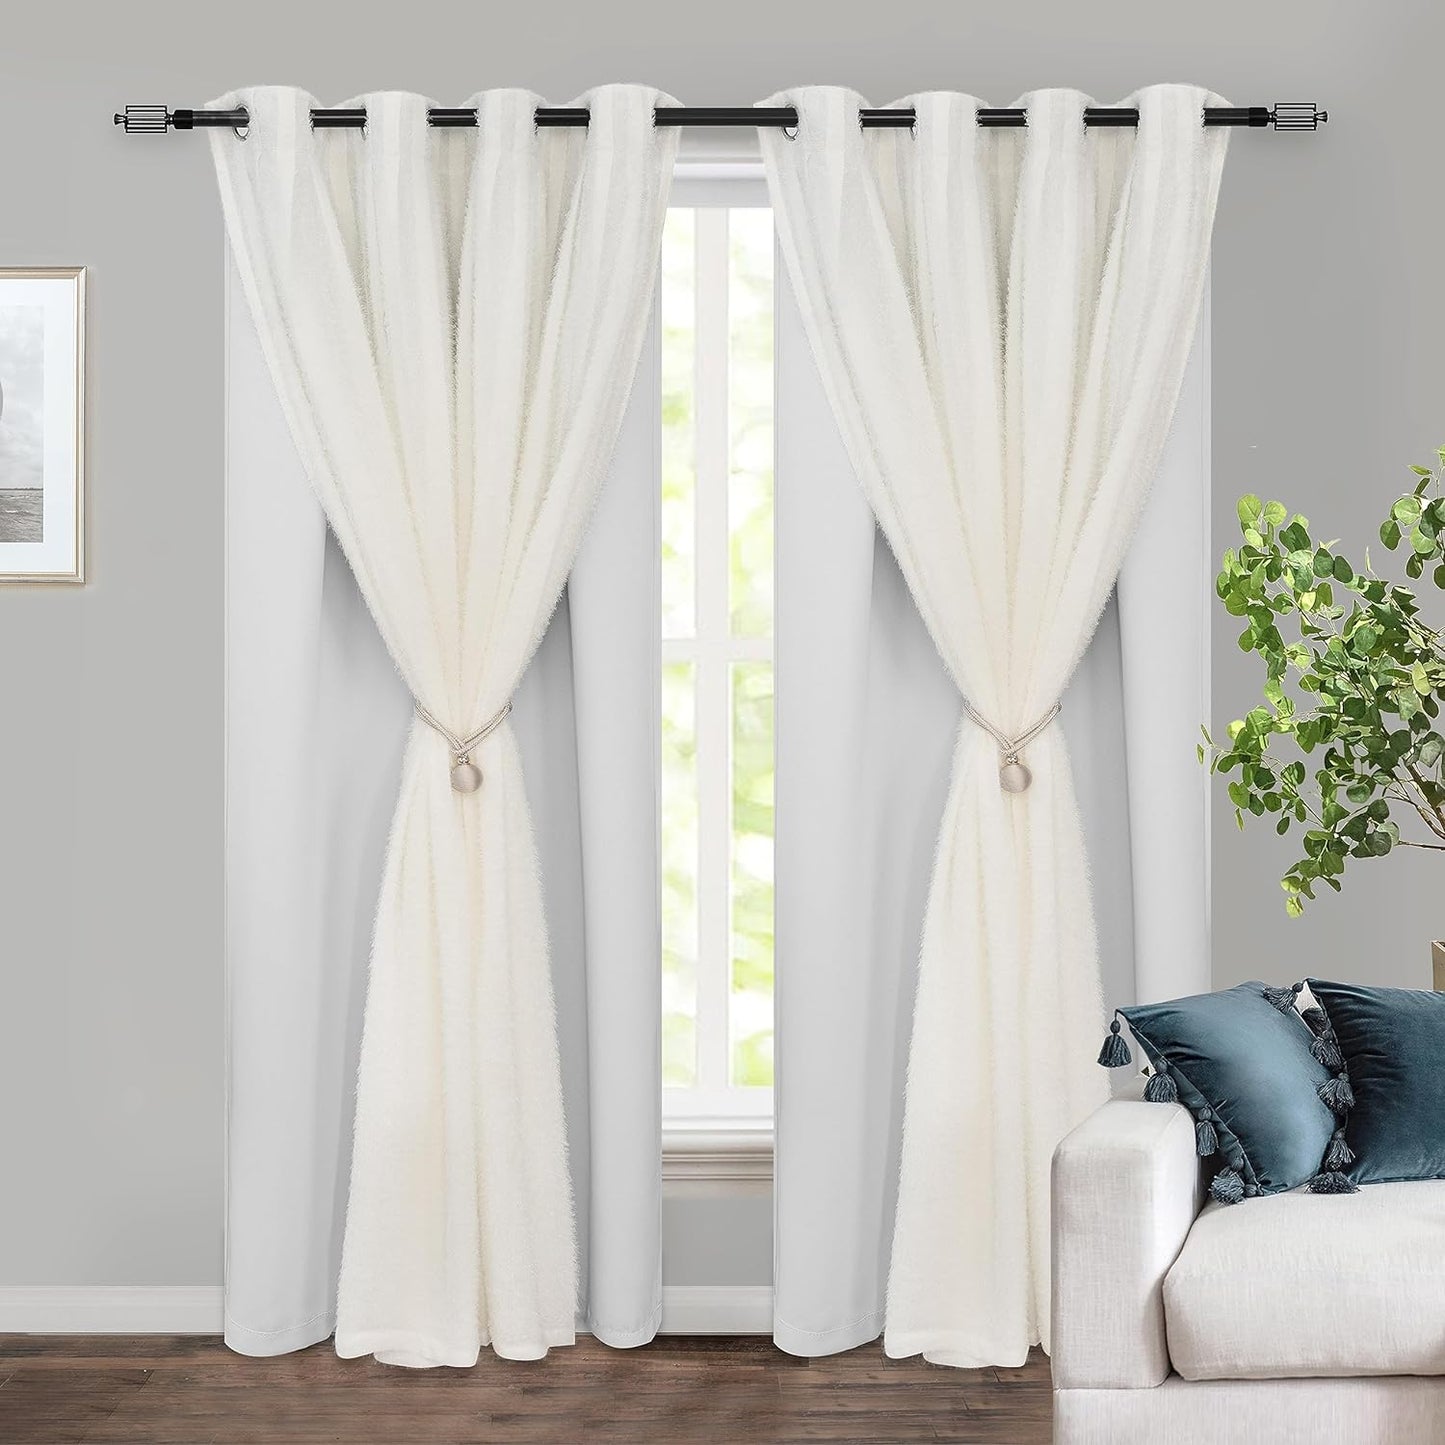 Driftaway White Pinch Pleated Voile Sheer Blackout Thermal Curtain Liner Embroidered with Pom Pom Lined Grommet Curtain for Kids Girls Bedroom Nursery Room 84 Inch Single Panel  DriftAway Creamy White 52"X84" 